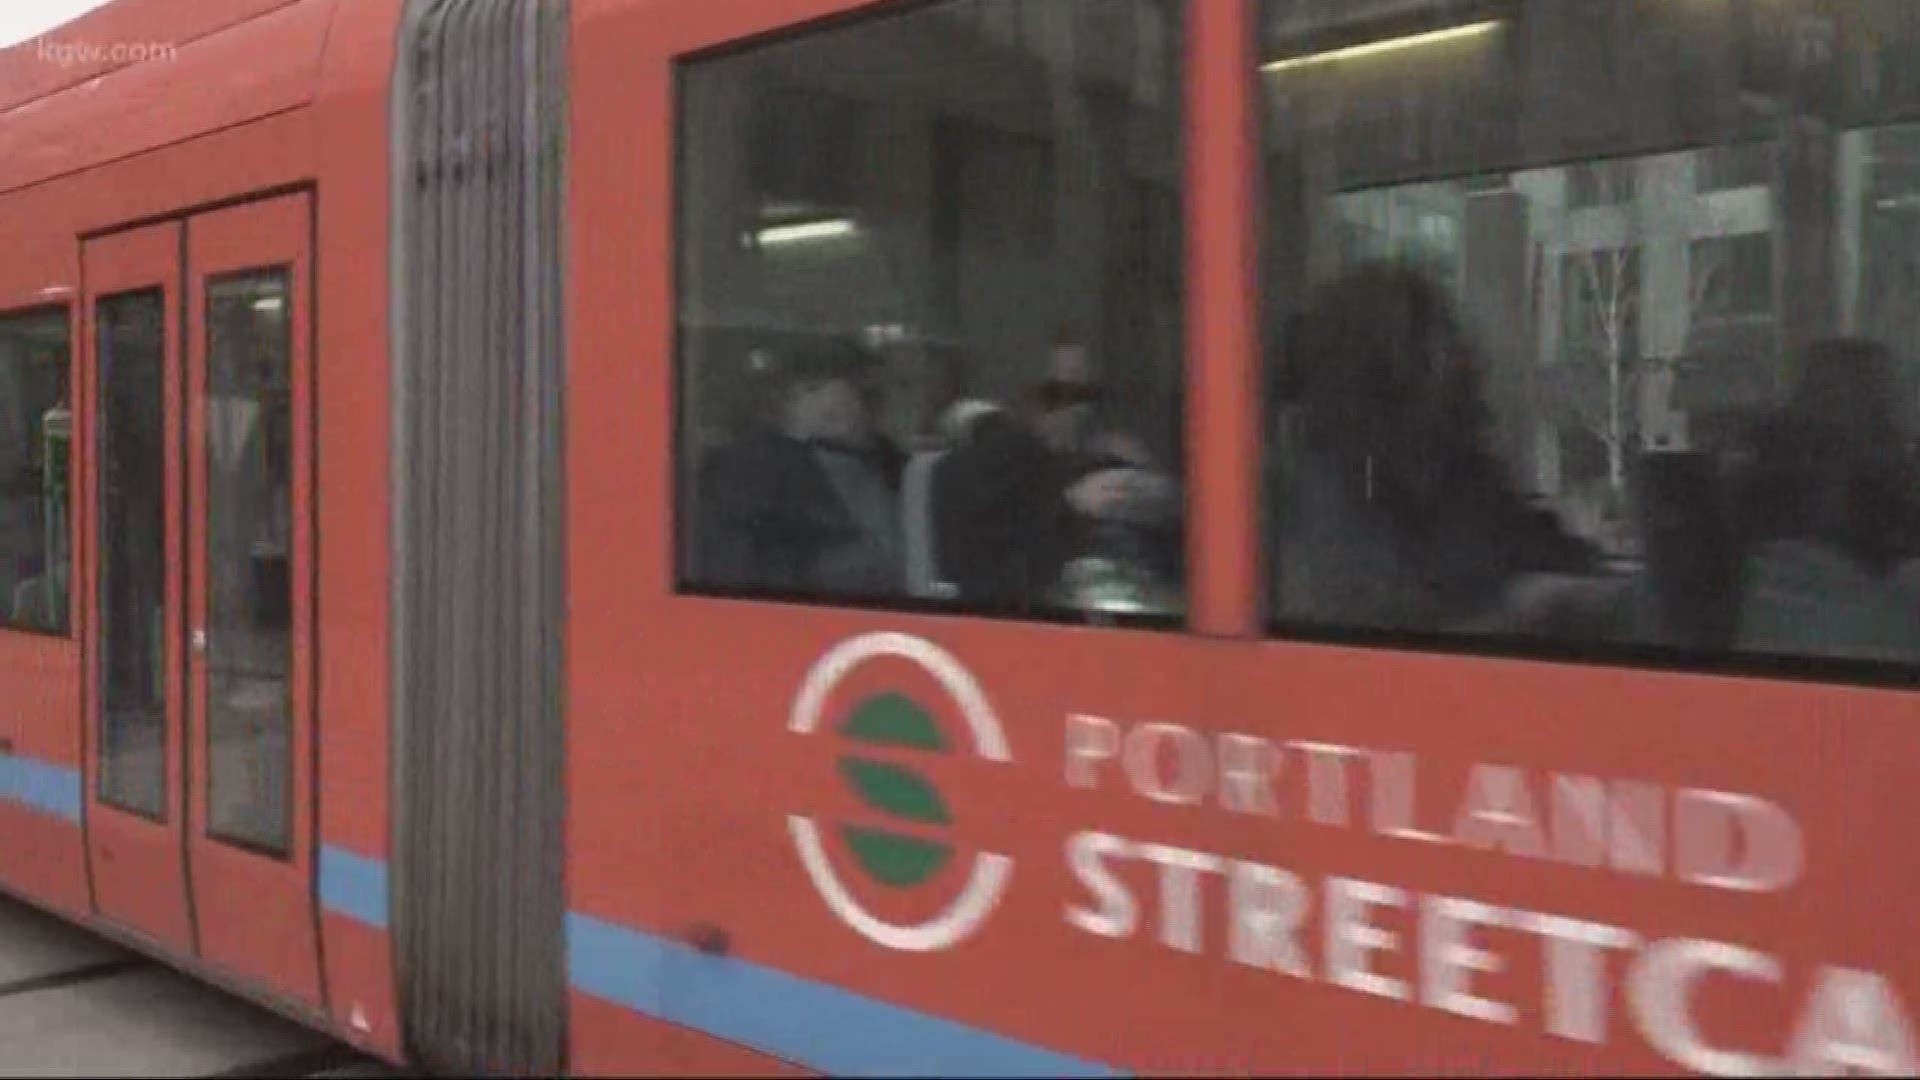 A new app gives streetcar riders a new way to explore Portland.